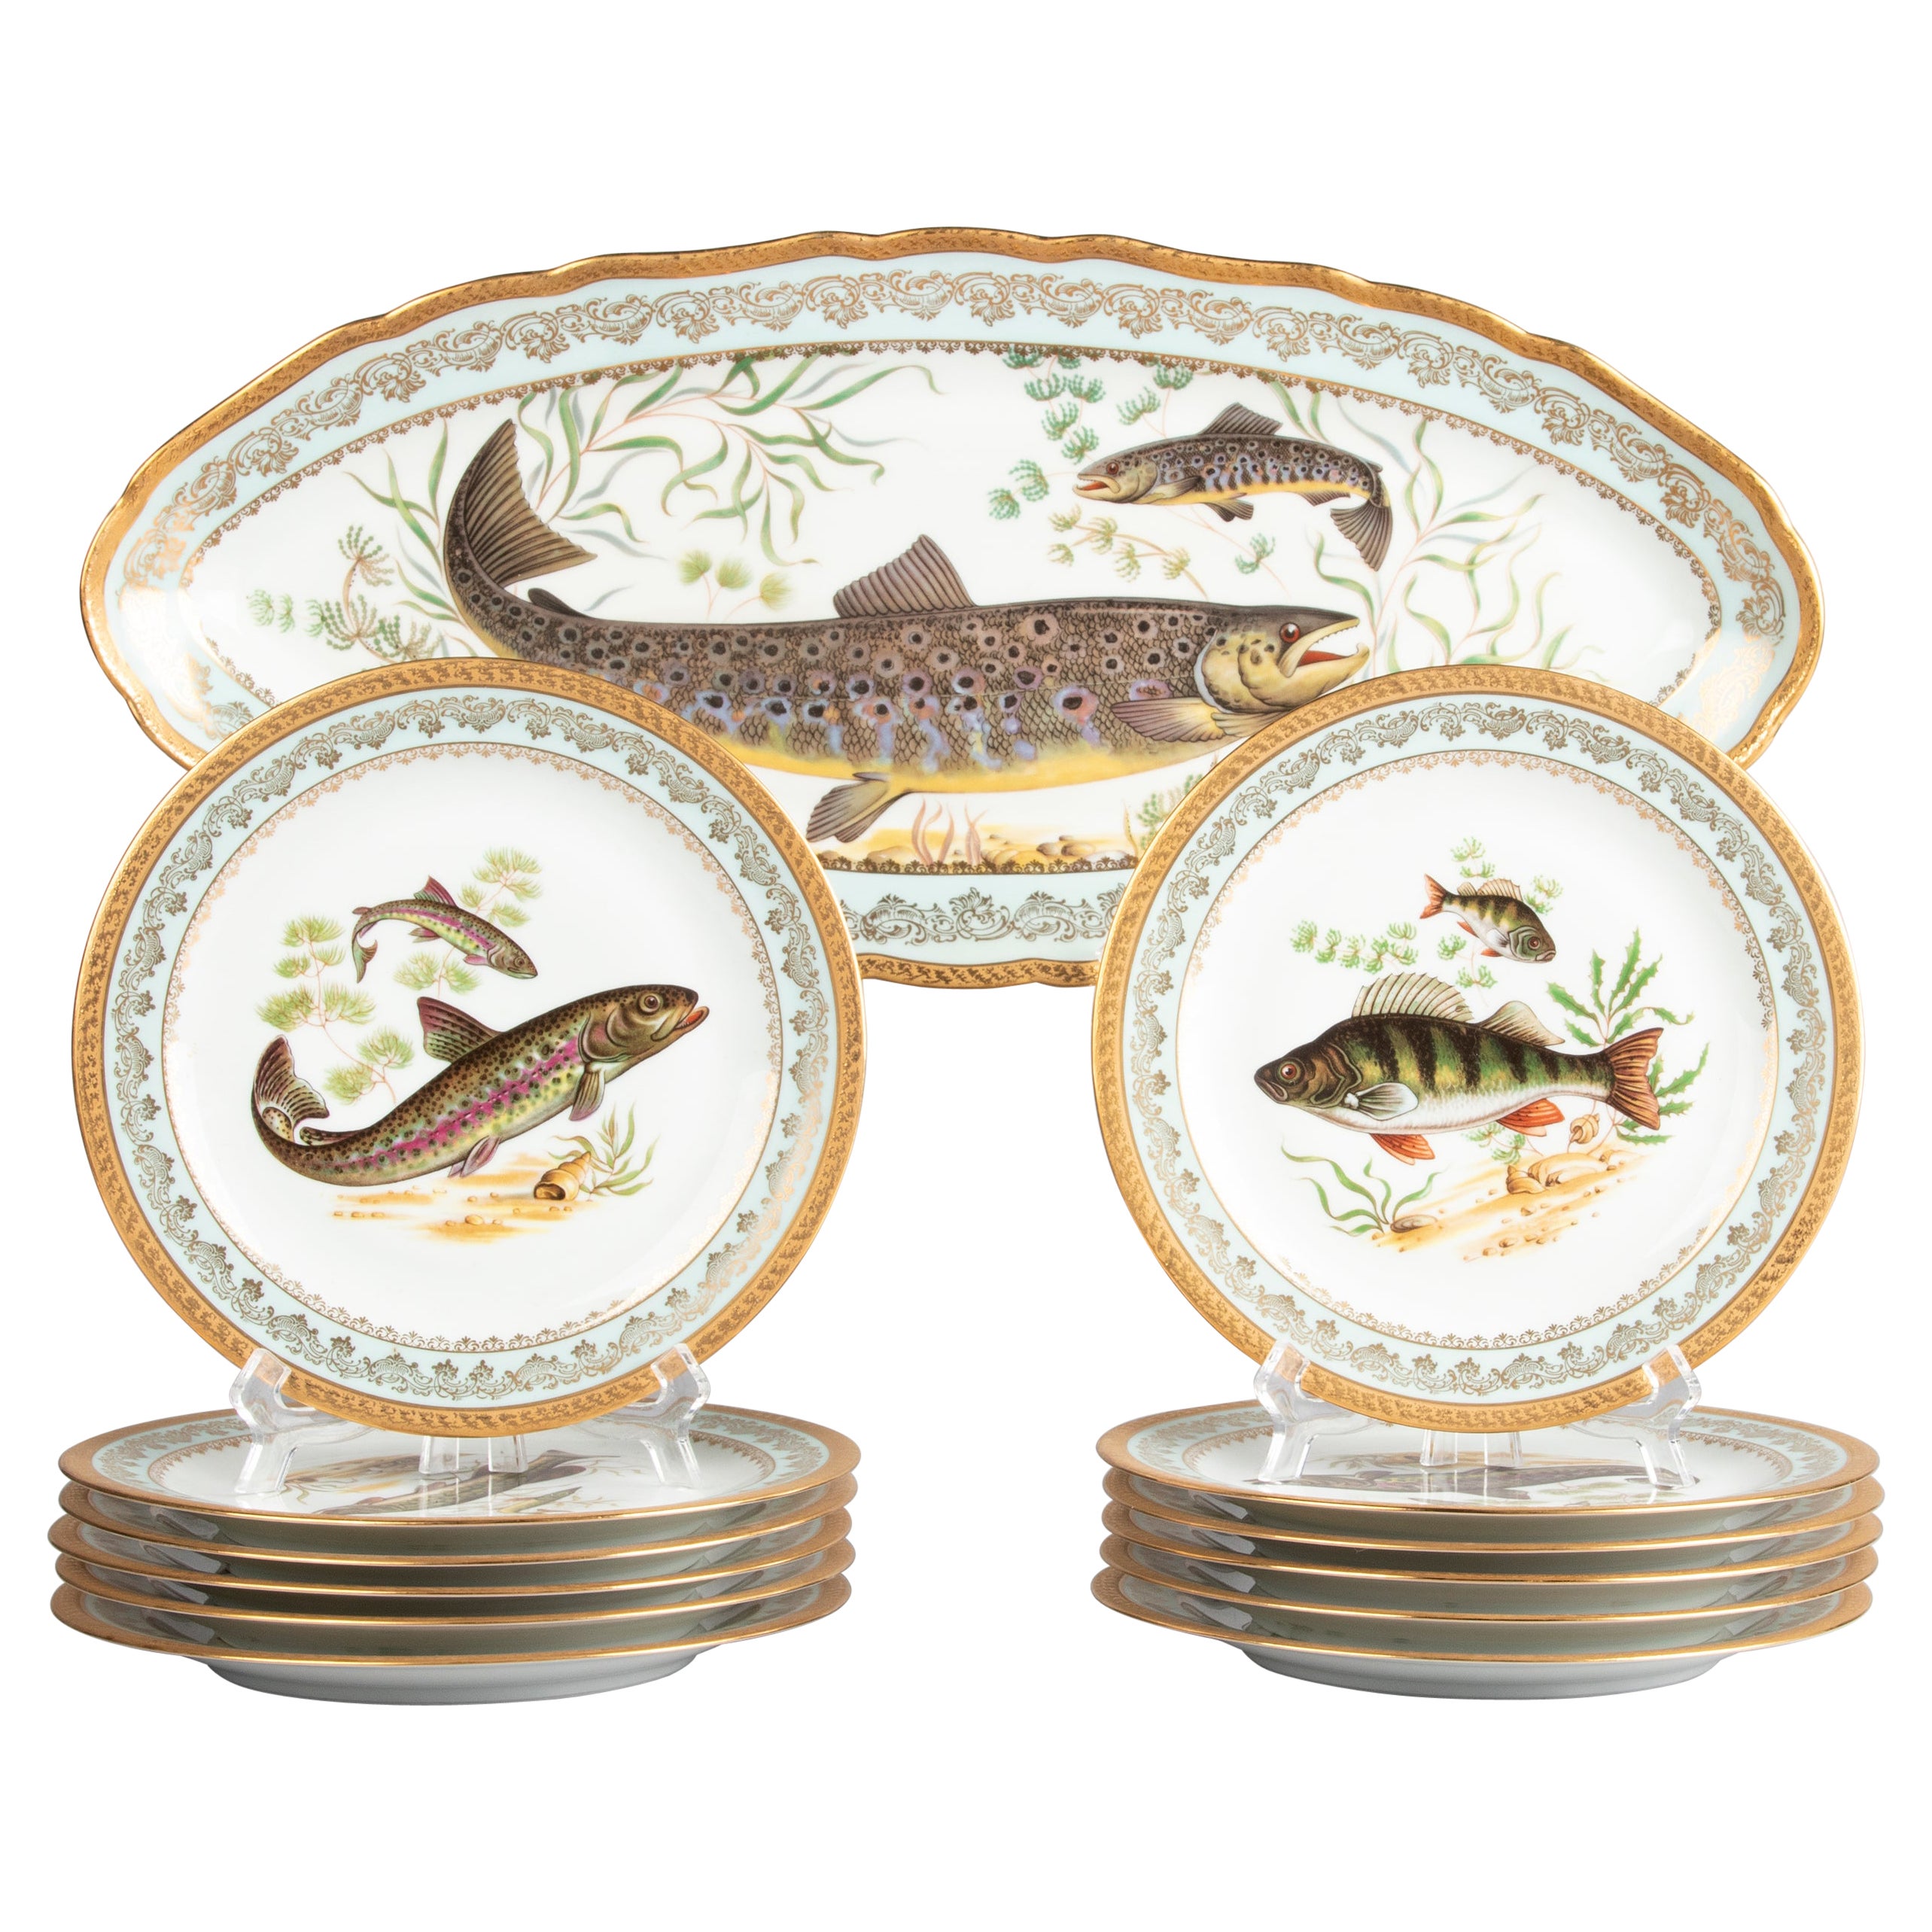 Porcelain Fish Service by Limoges Chadelaud with Gilt Encrusted Rims